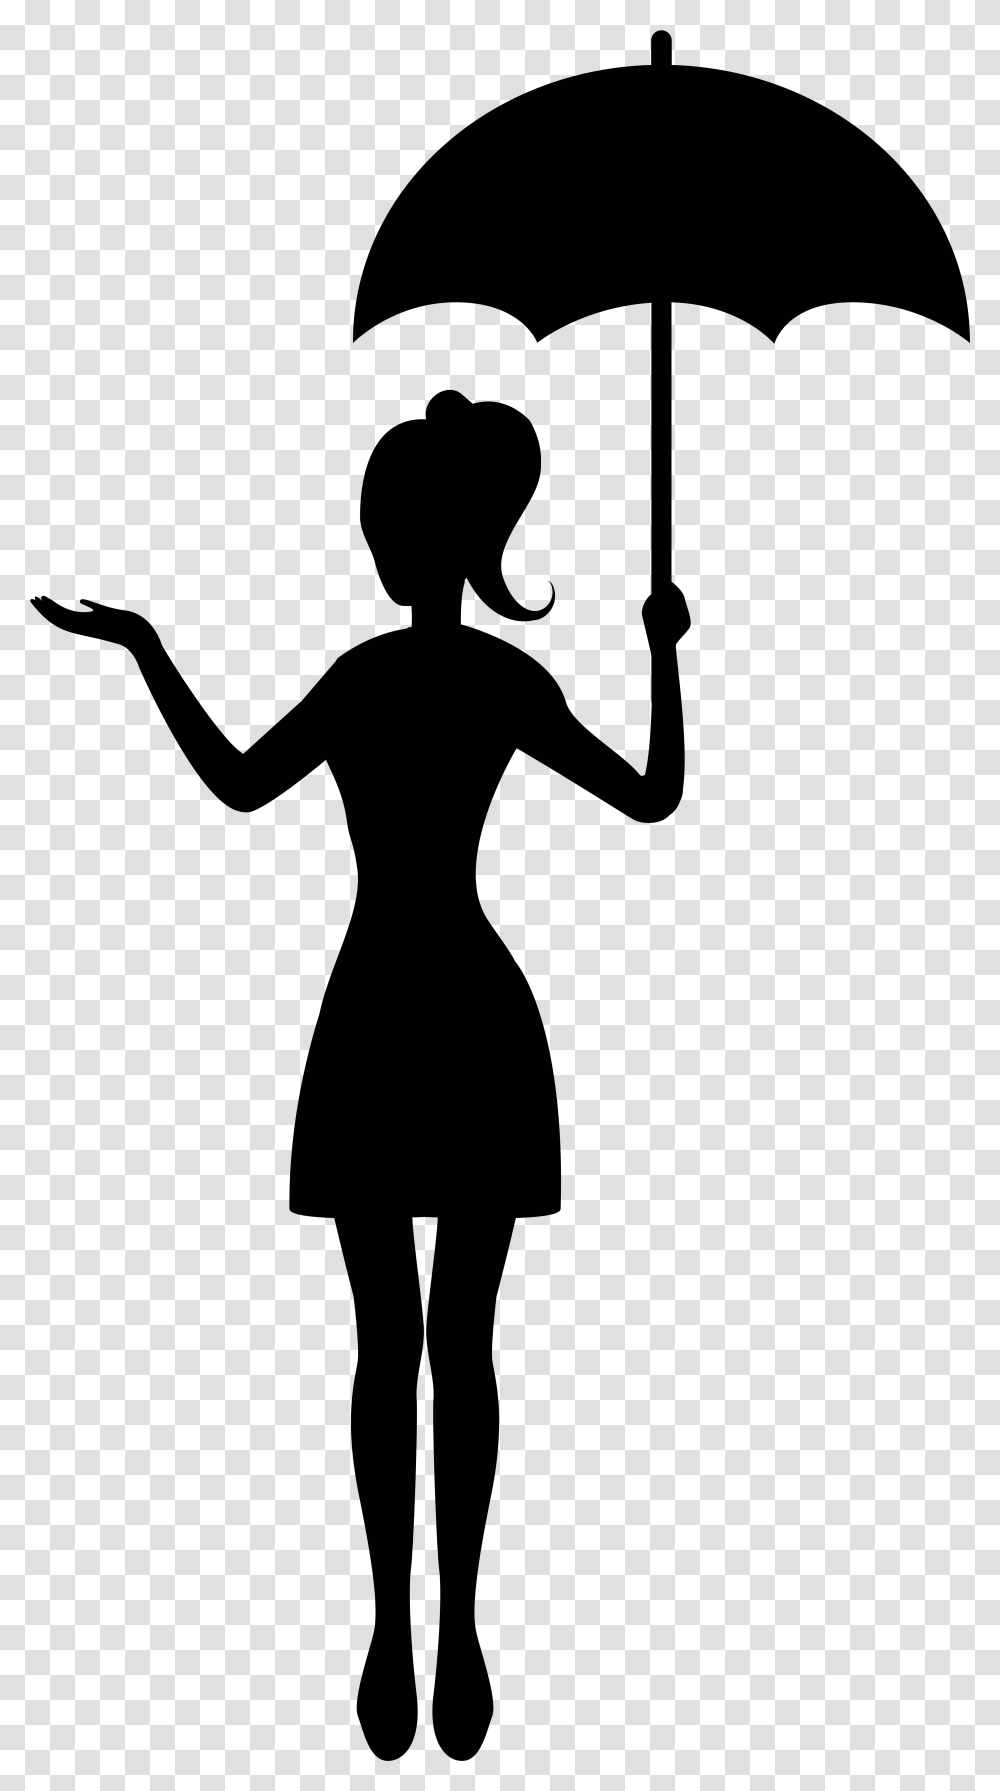 Girl With Umbrella Silhouette Silhouette Of Girl With Umbrella, Back, Light, Flare Transparent Png